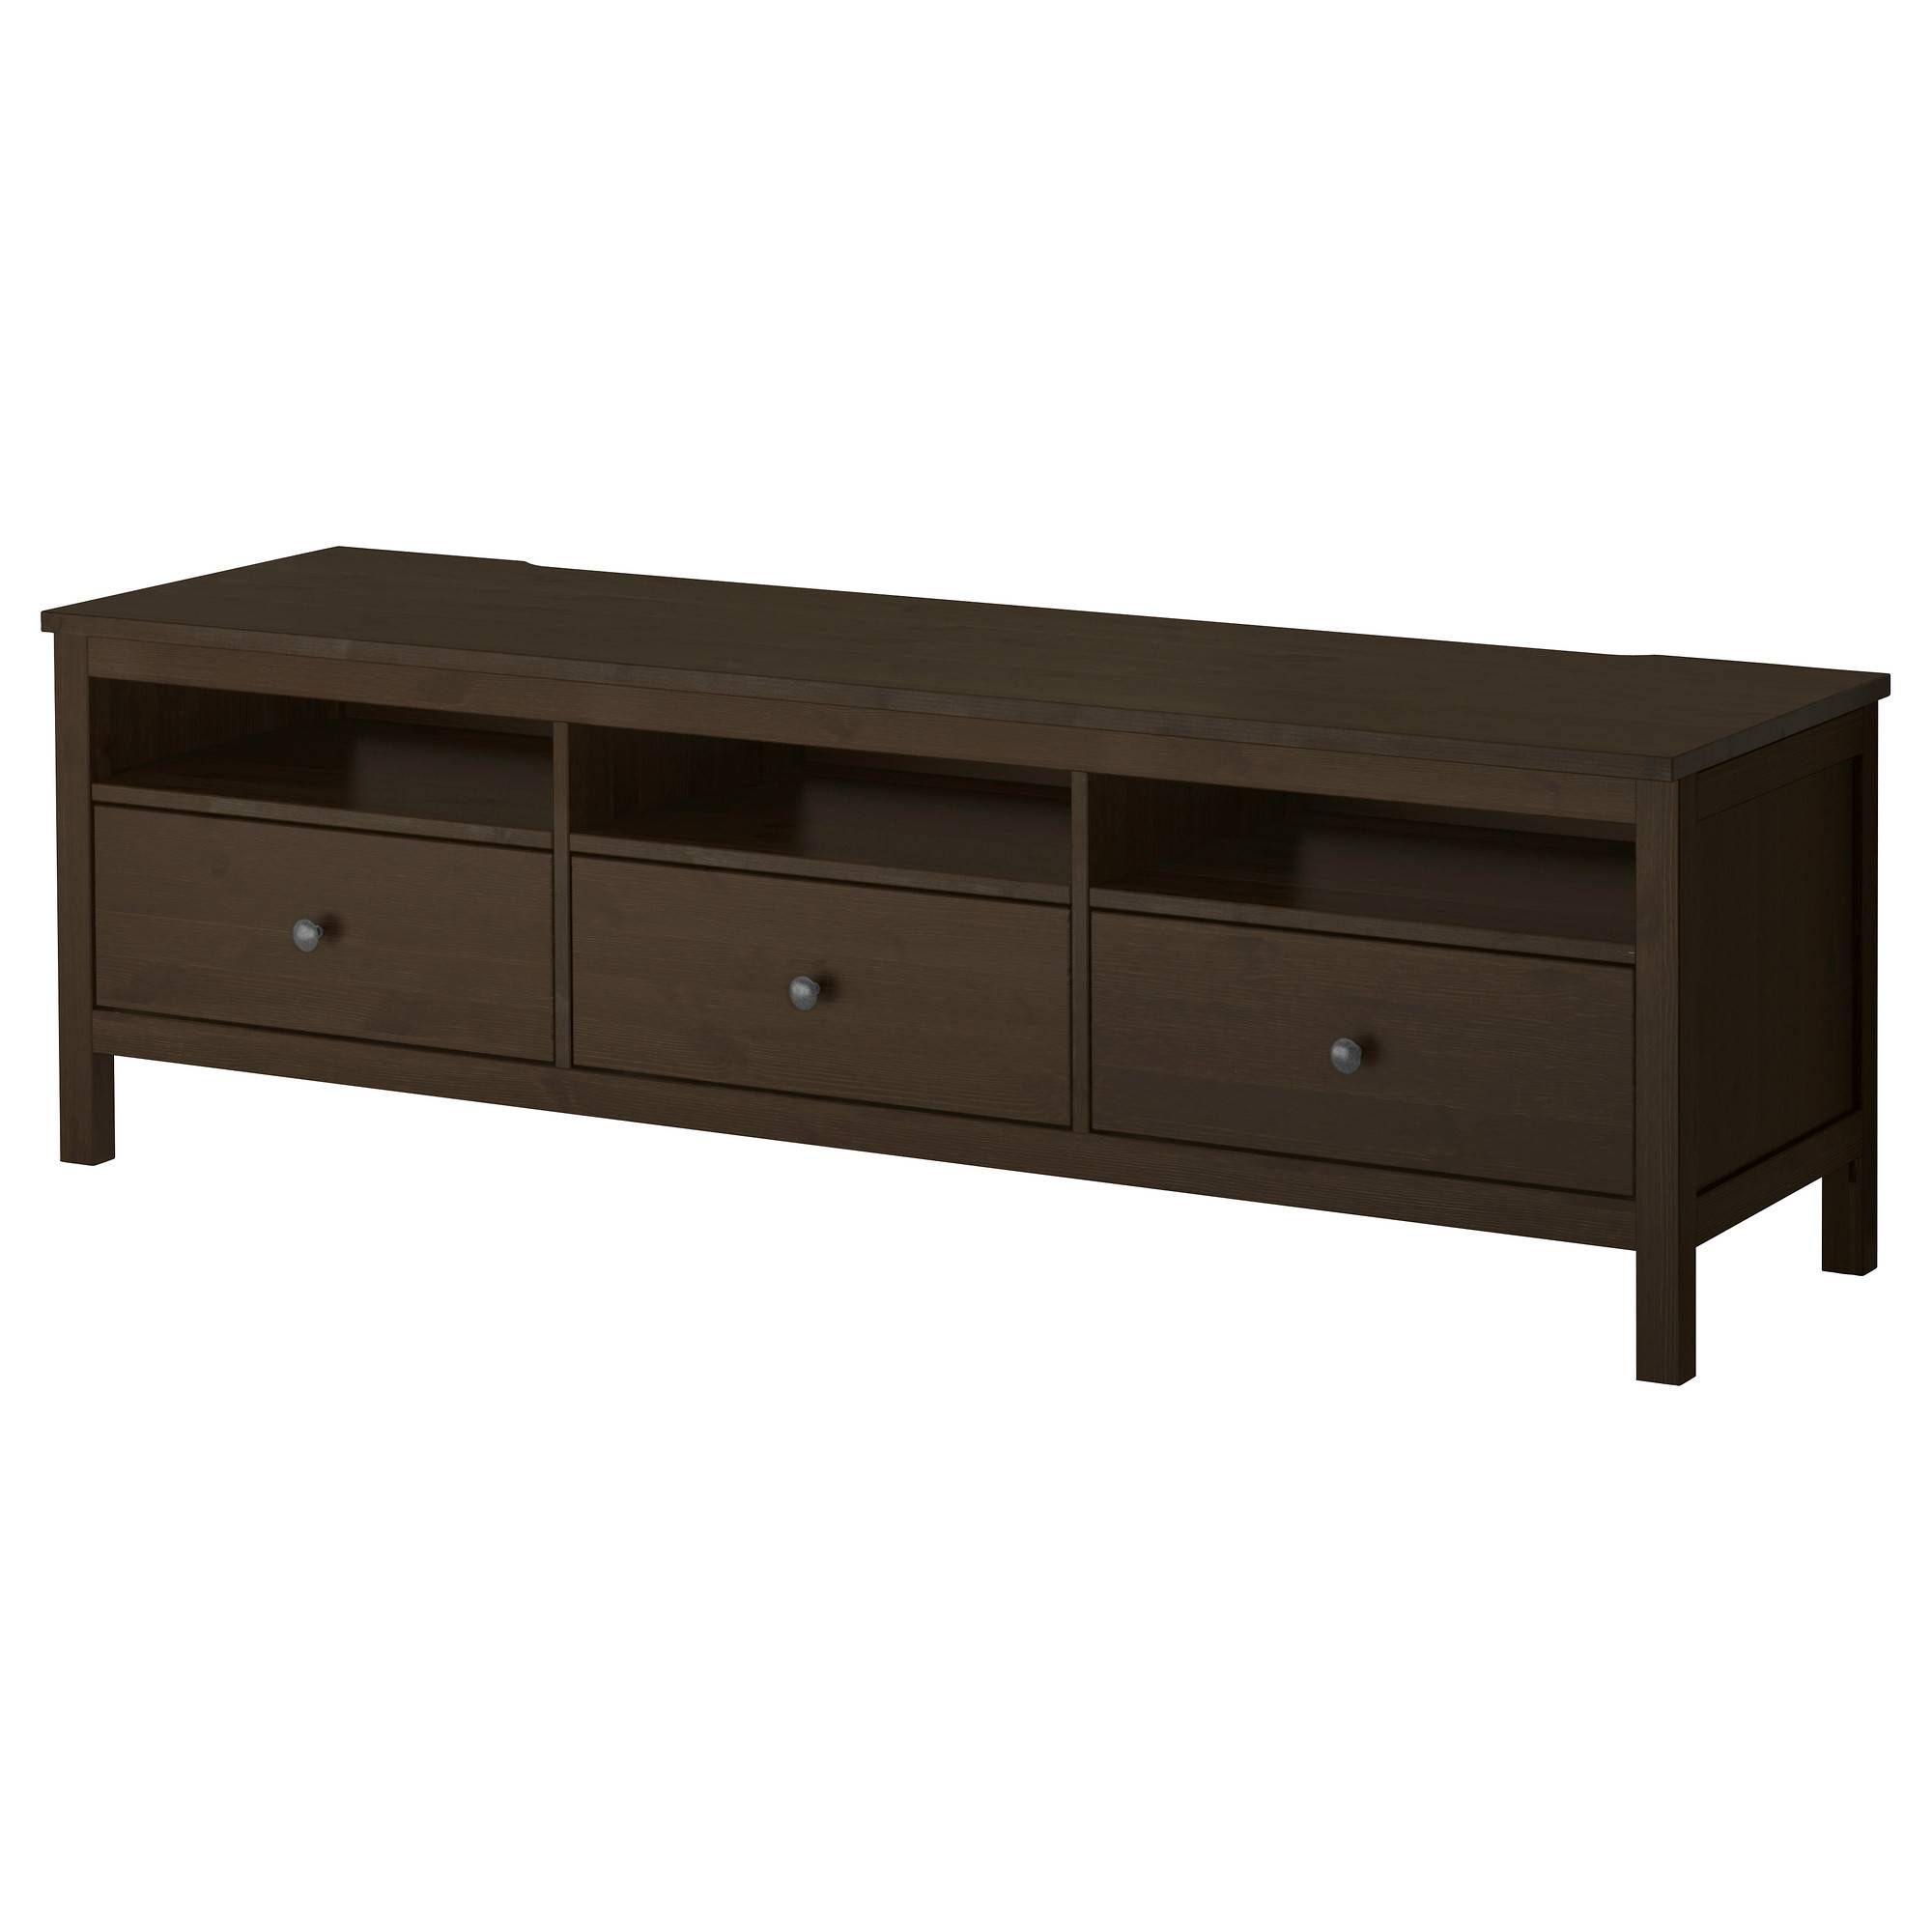 Tv Media Furniture – Tv Stands, Cabinets & Media Storage – Ikea Pertaining To Long Tv Cabinets Furniture (View 14 of 15)